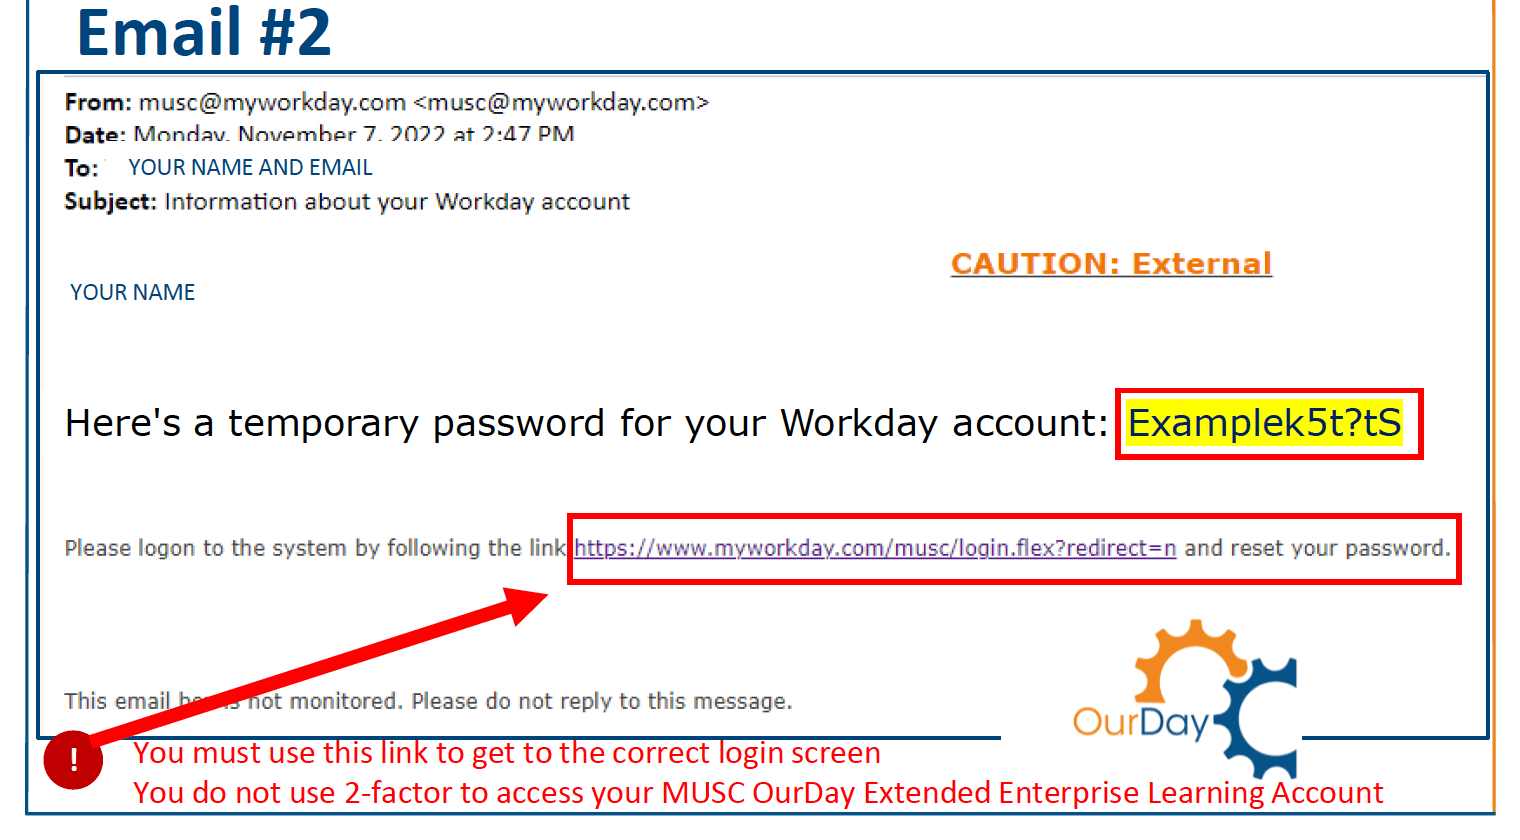 Sample email showing temporary password